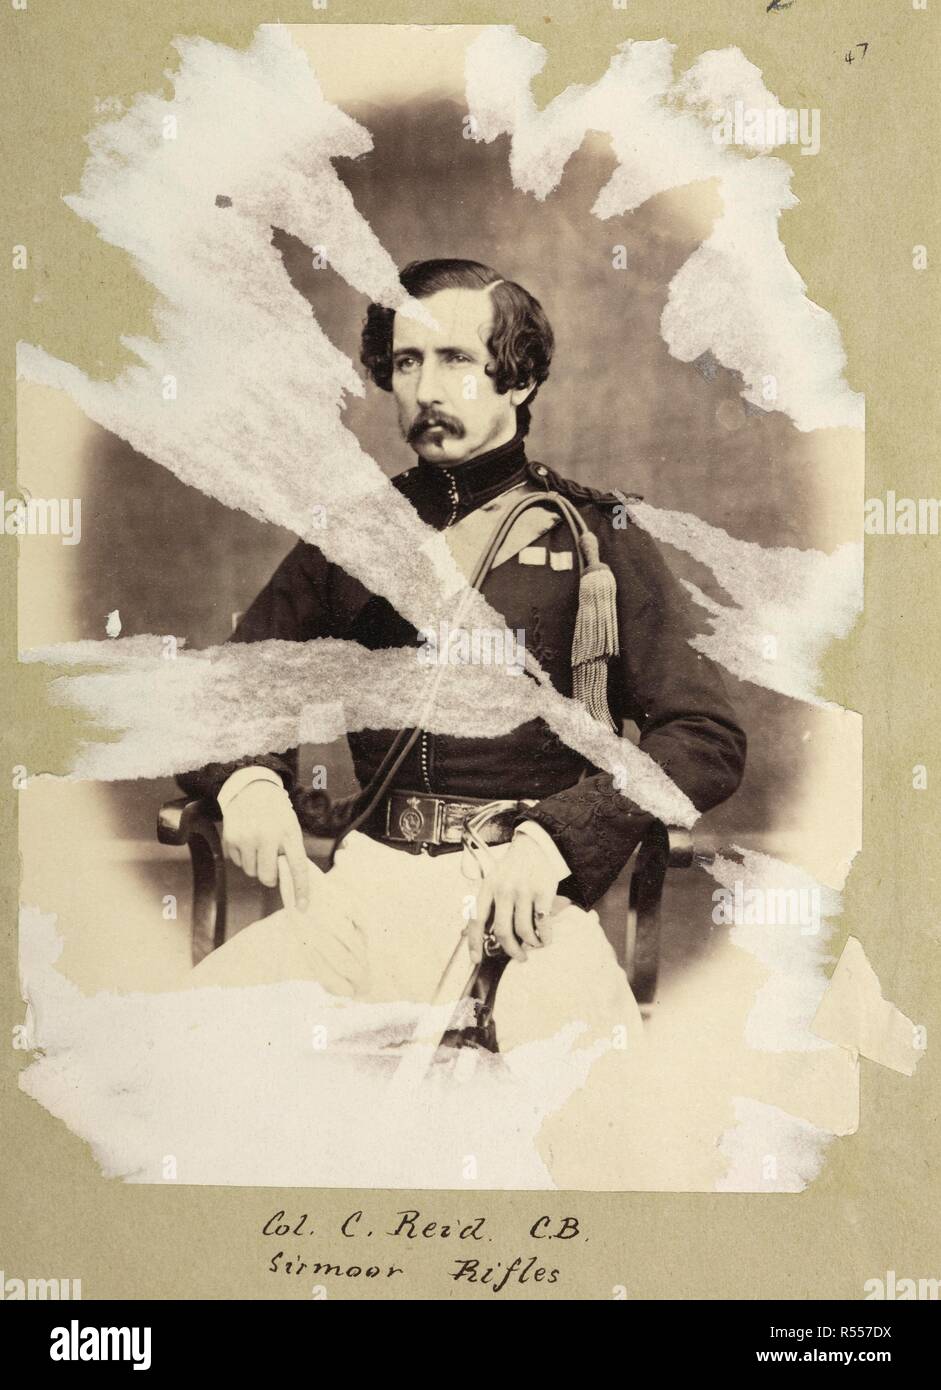 Col. C. Reid C.B. Sirmoor Rifles. A three-quarter length seated portrait, in uniform, of Col. (later General Sir) Charles Reid (1819-1901), Bengal Native Infantry. The print has been severely damaged by attempts to separate it from the page. Album of portraits of Indian Army officers and Indian views. c. 1860. Albumen print. Source: Photo 31/1(47). Language: English. Author: UNKNOWN. Stock Photo